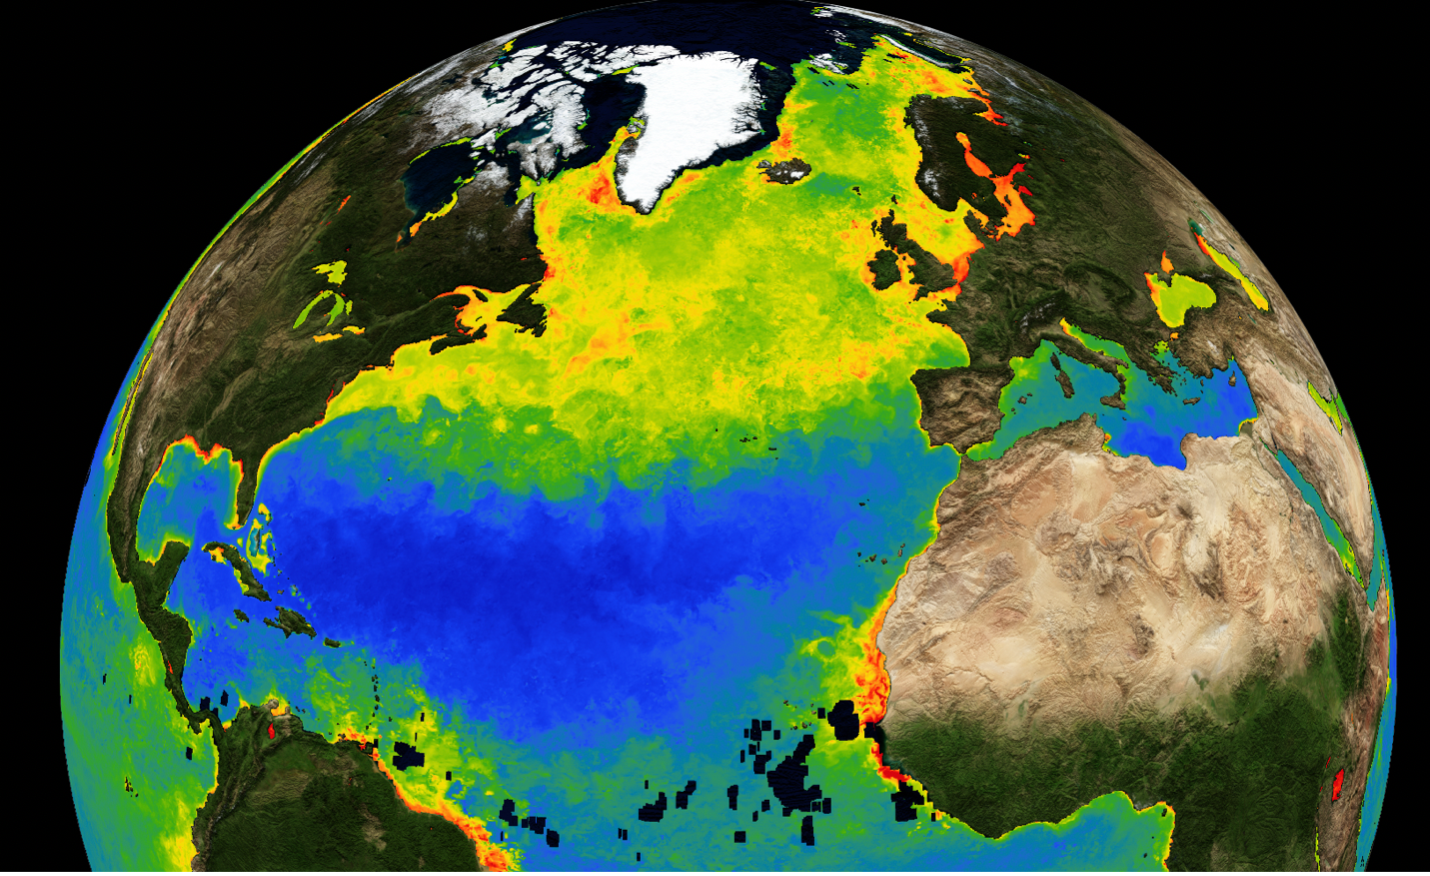 Planetary Warming Leads to Seasonal Shifts in the Blooming of Phytoplankton.